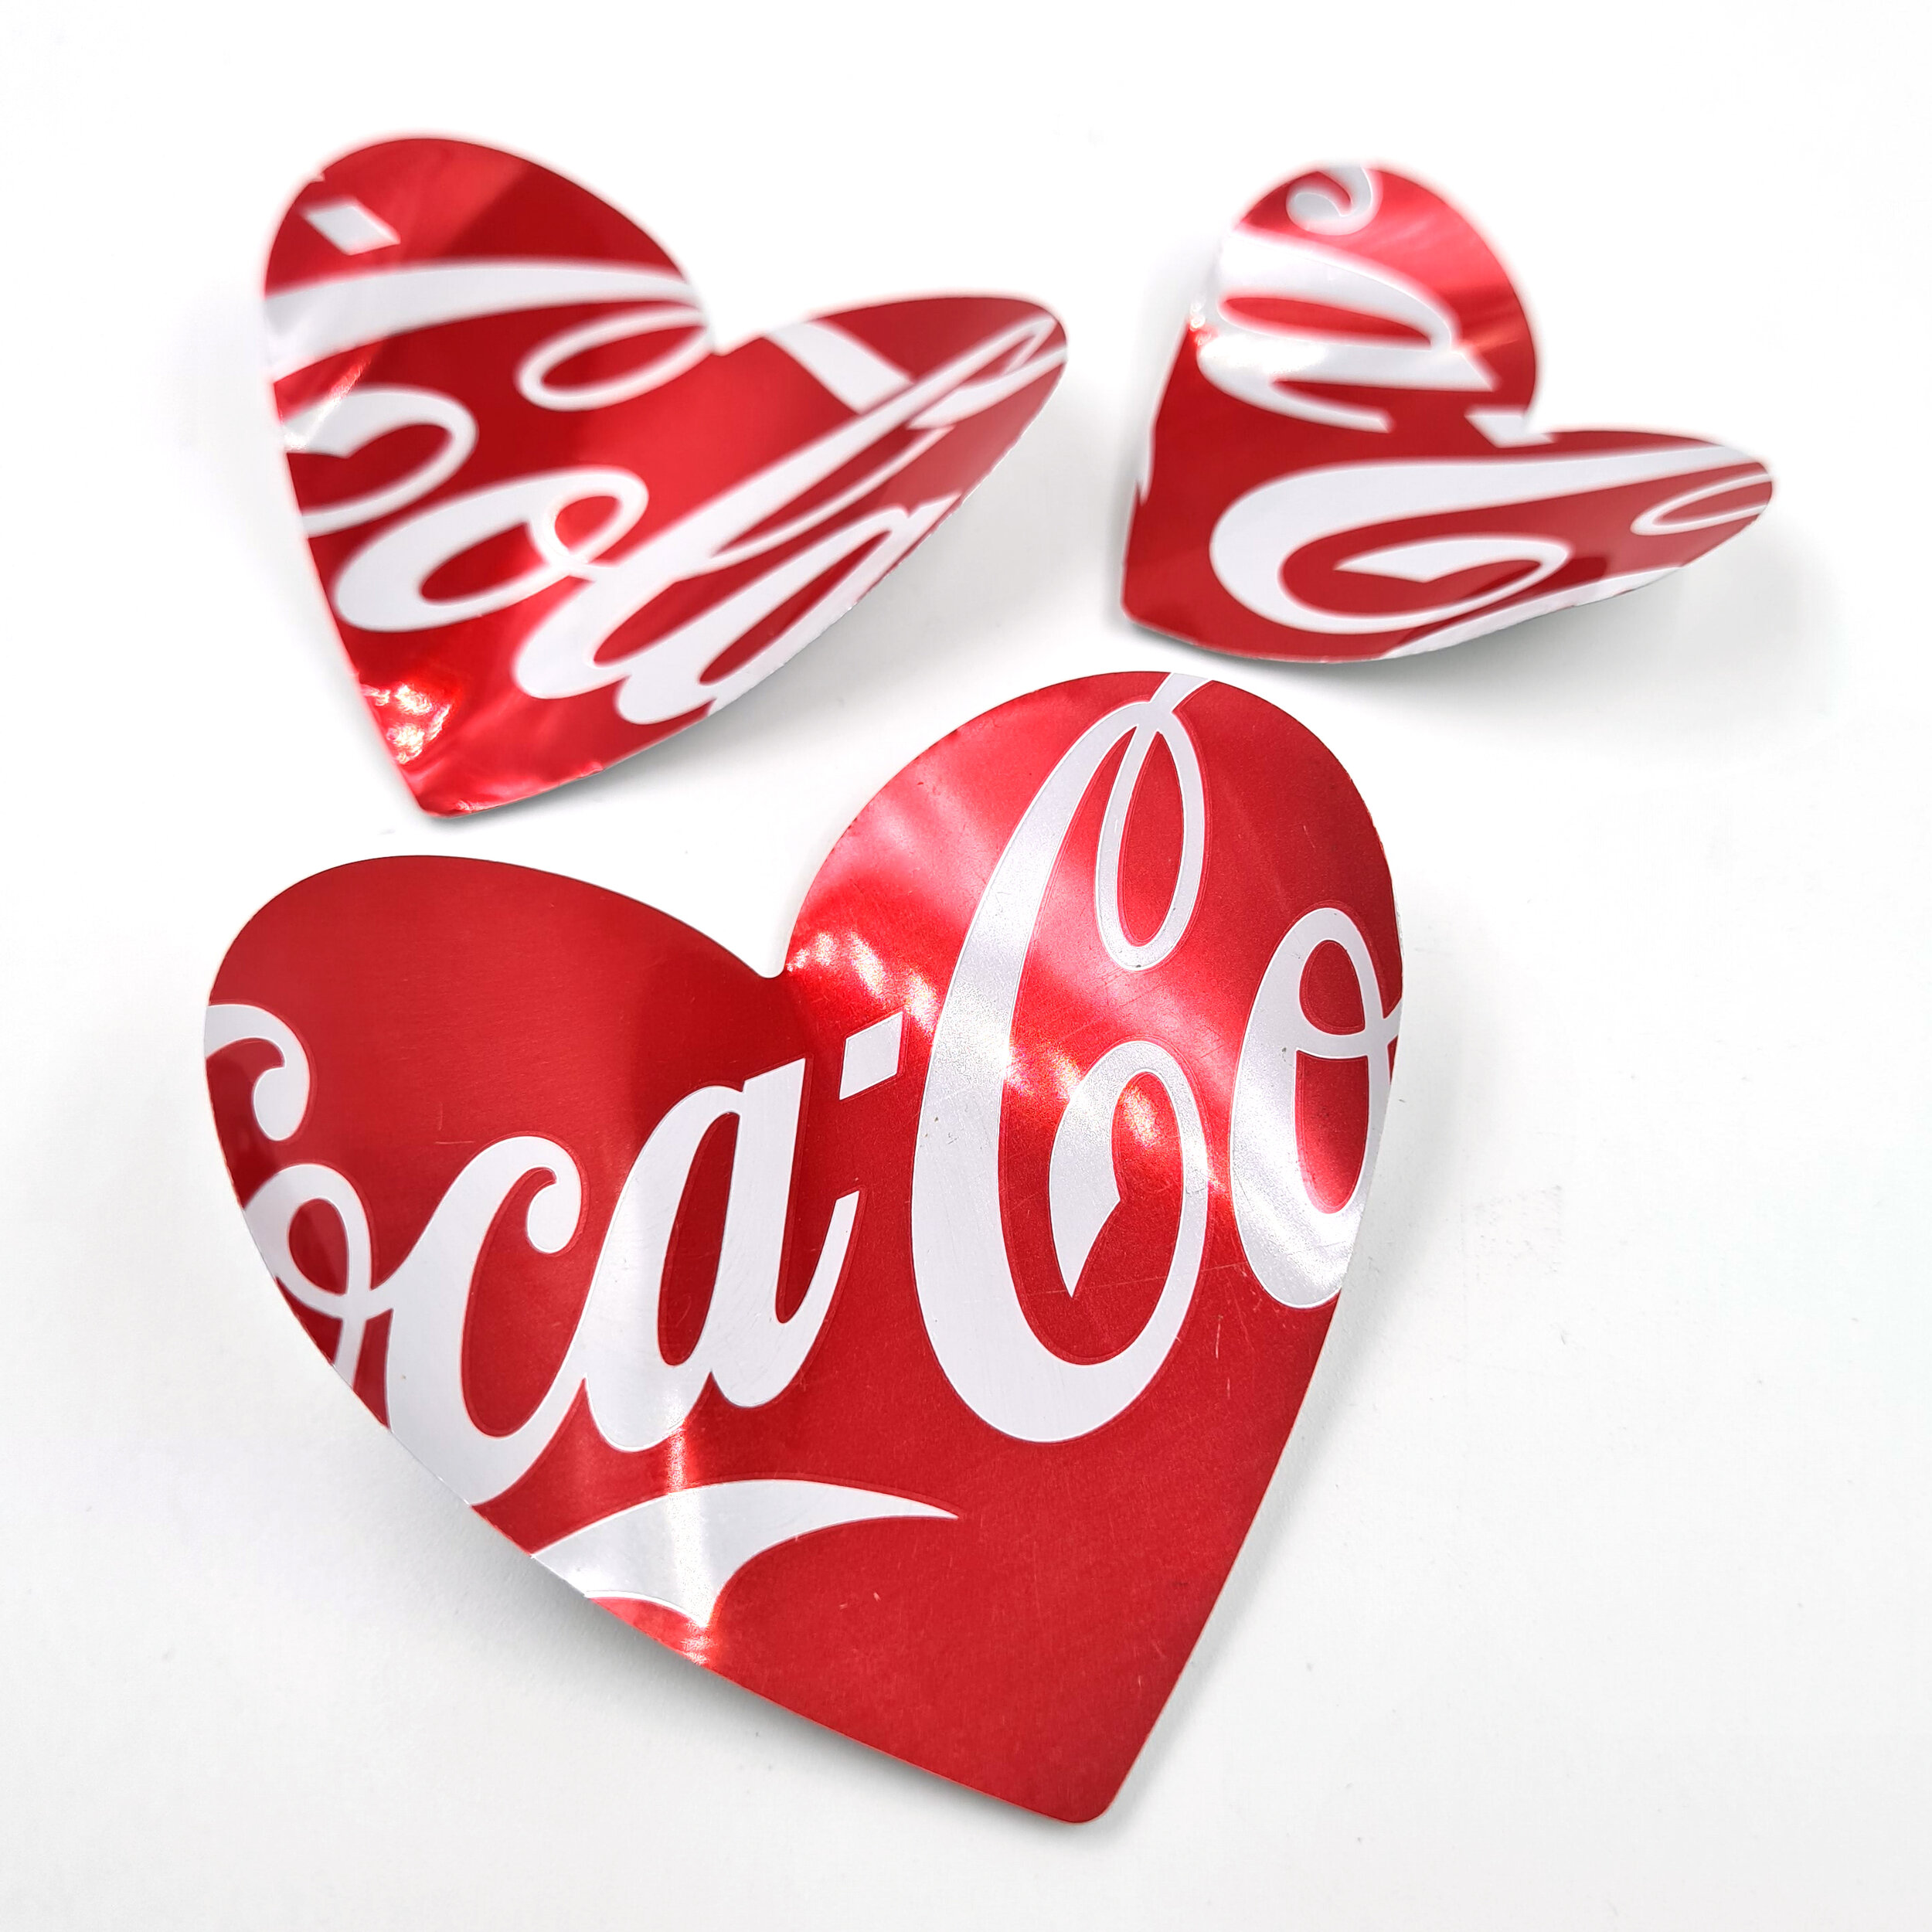 Three Coca-Cola Heart eco Can Magnets hand made in UK 